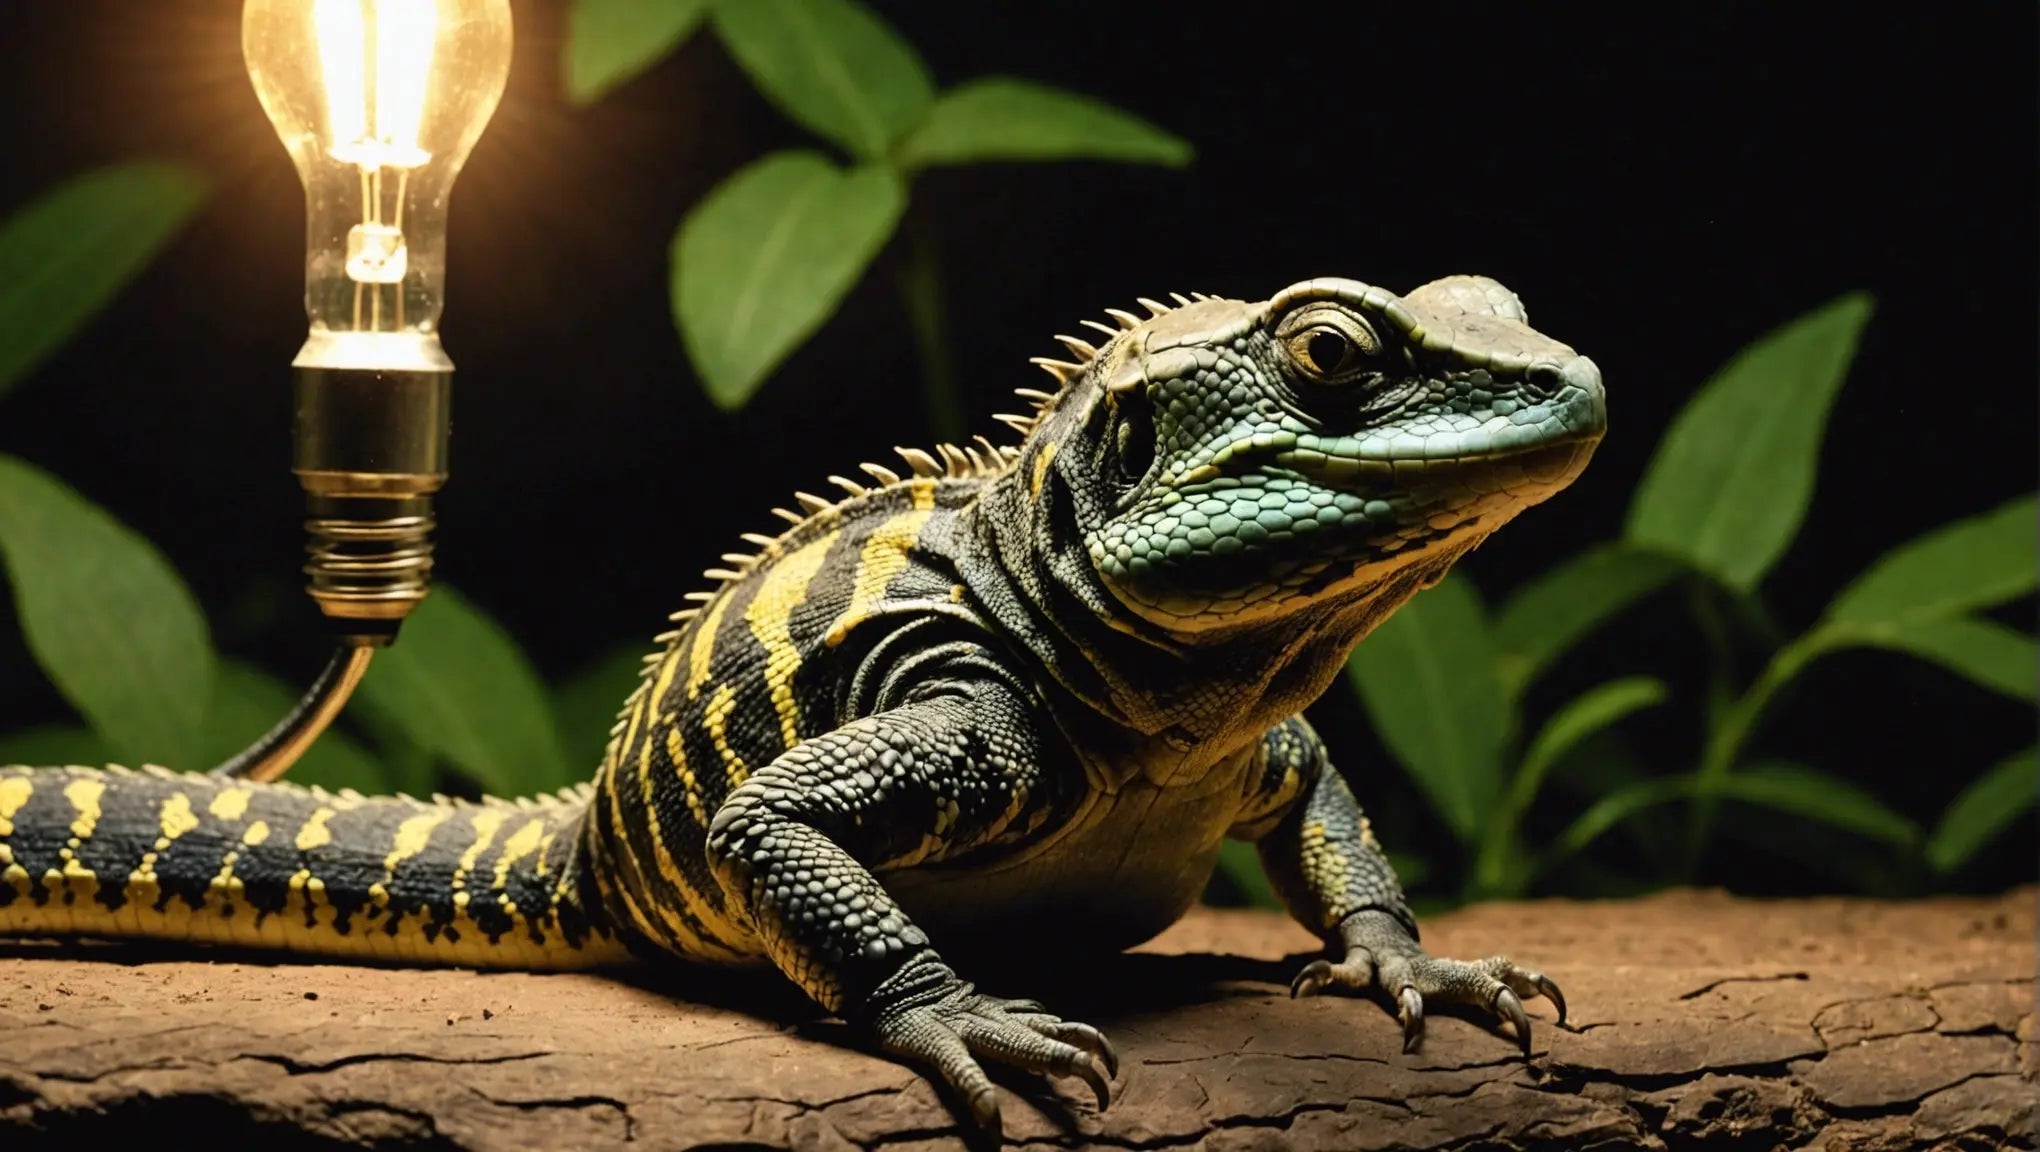 Enhance Your Reptile's Lighting with Zoo-Med Bulbs